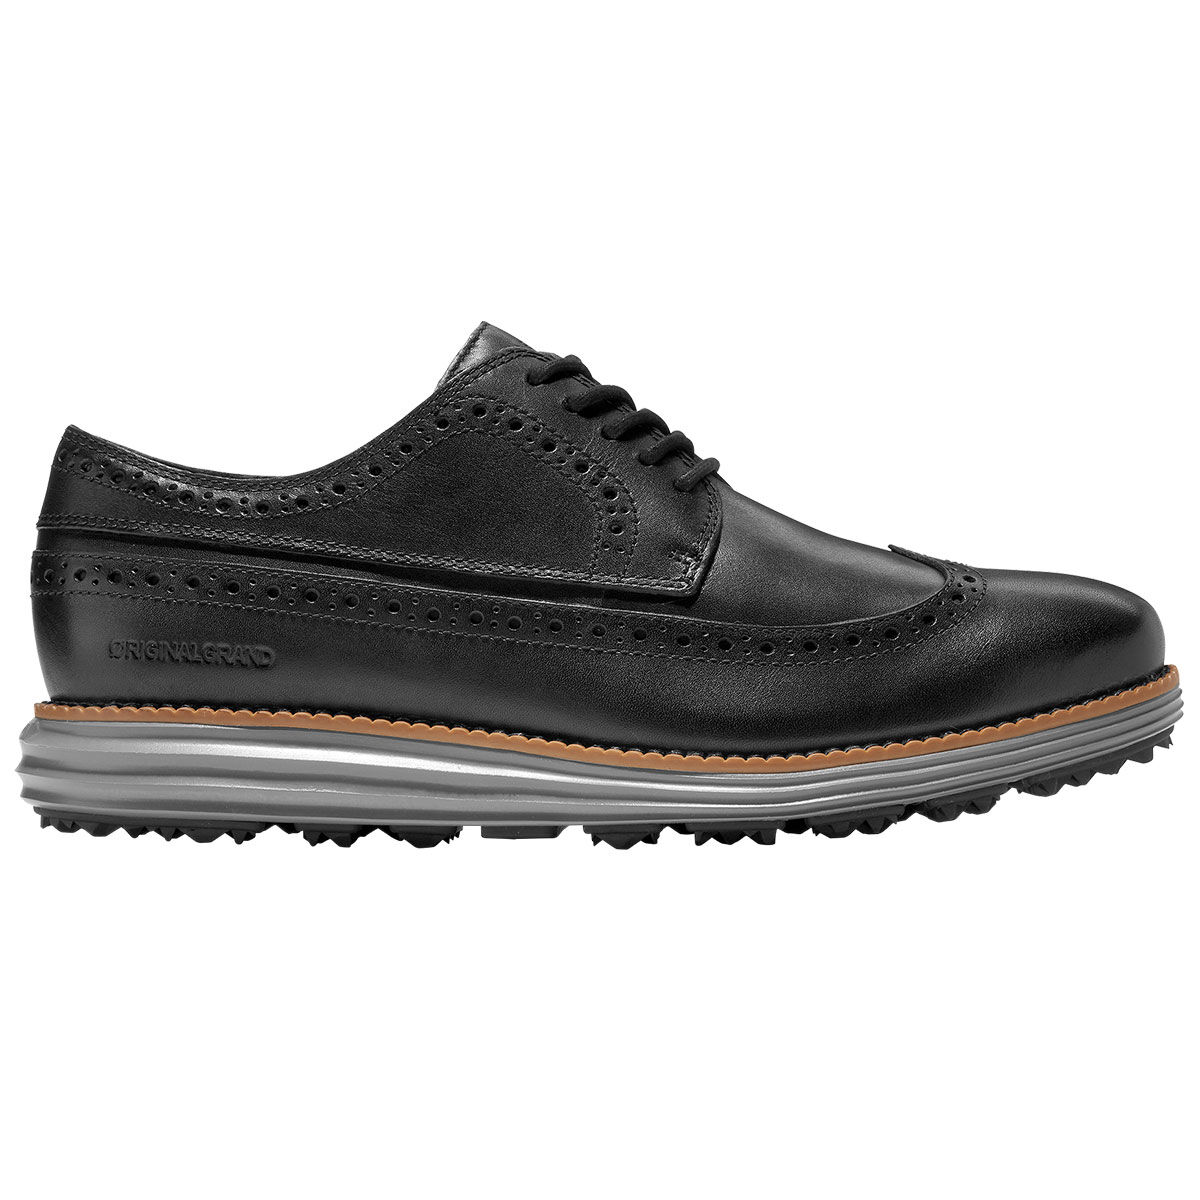 Cole Haan Men's OG Longwing Oxford Spikeless Golf Shoes, Mens, Black/natural/quiet shade, 7 | American Golf von Cole Haan